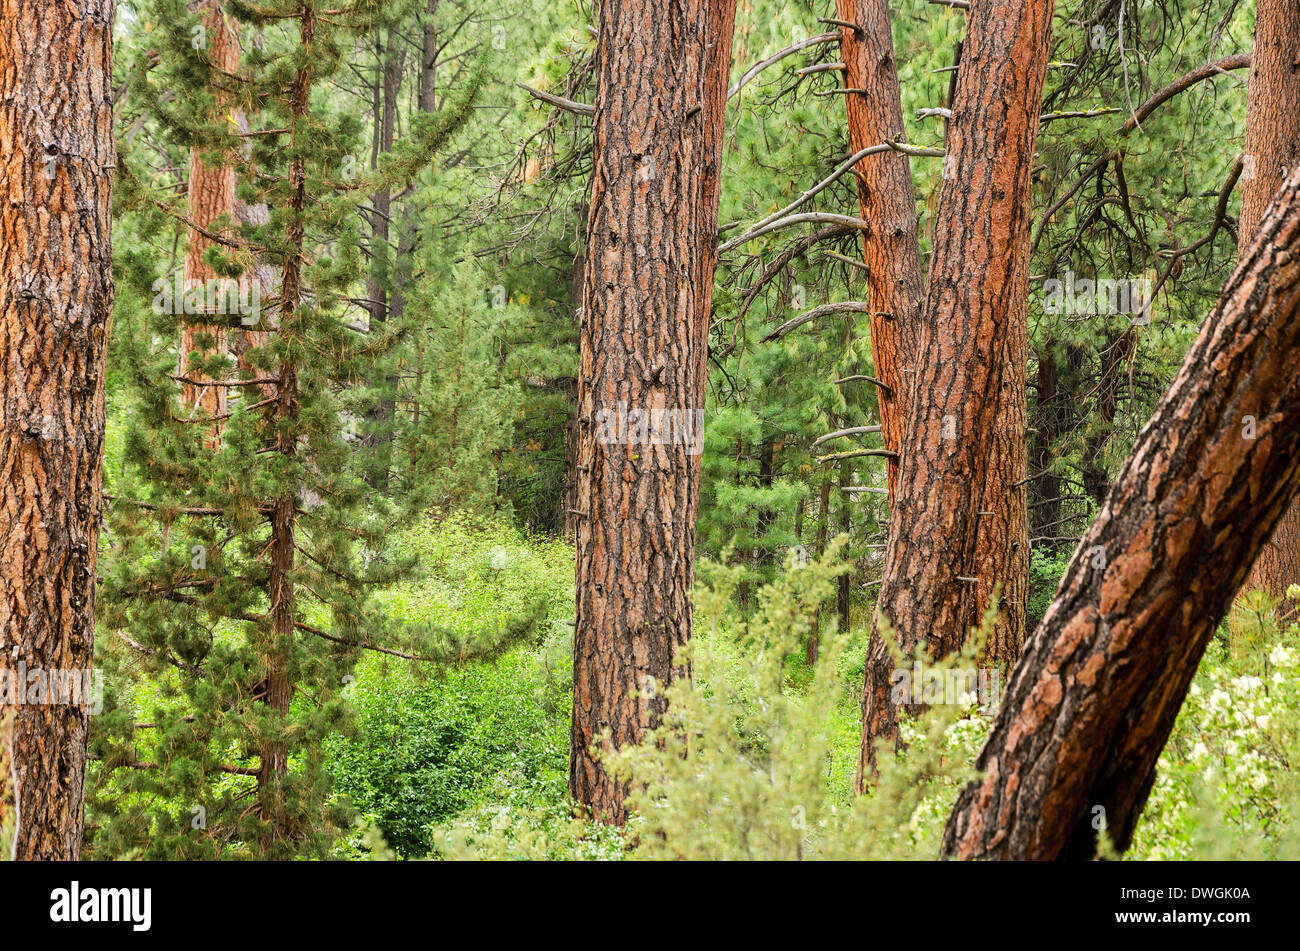 View of pine trees with a combination of tree trunks and foliage Stock Photo